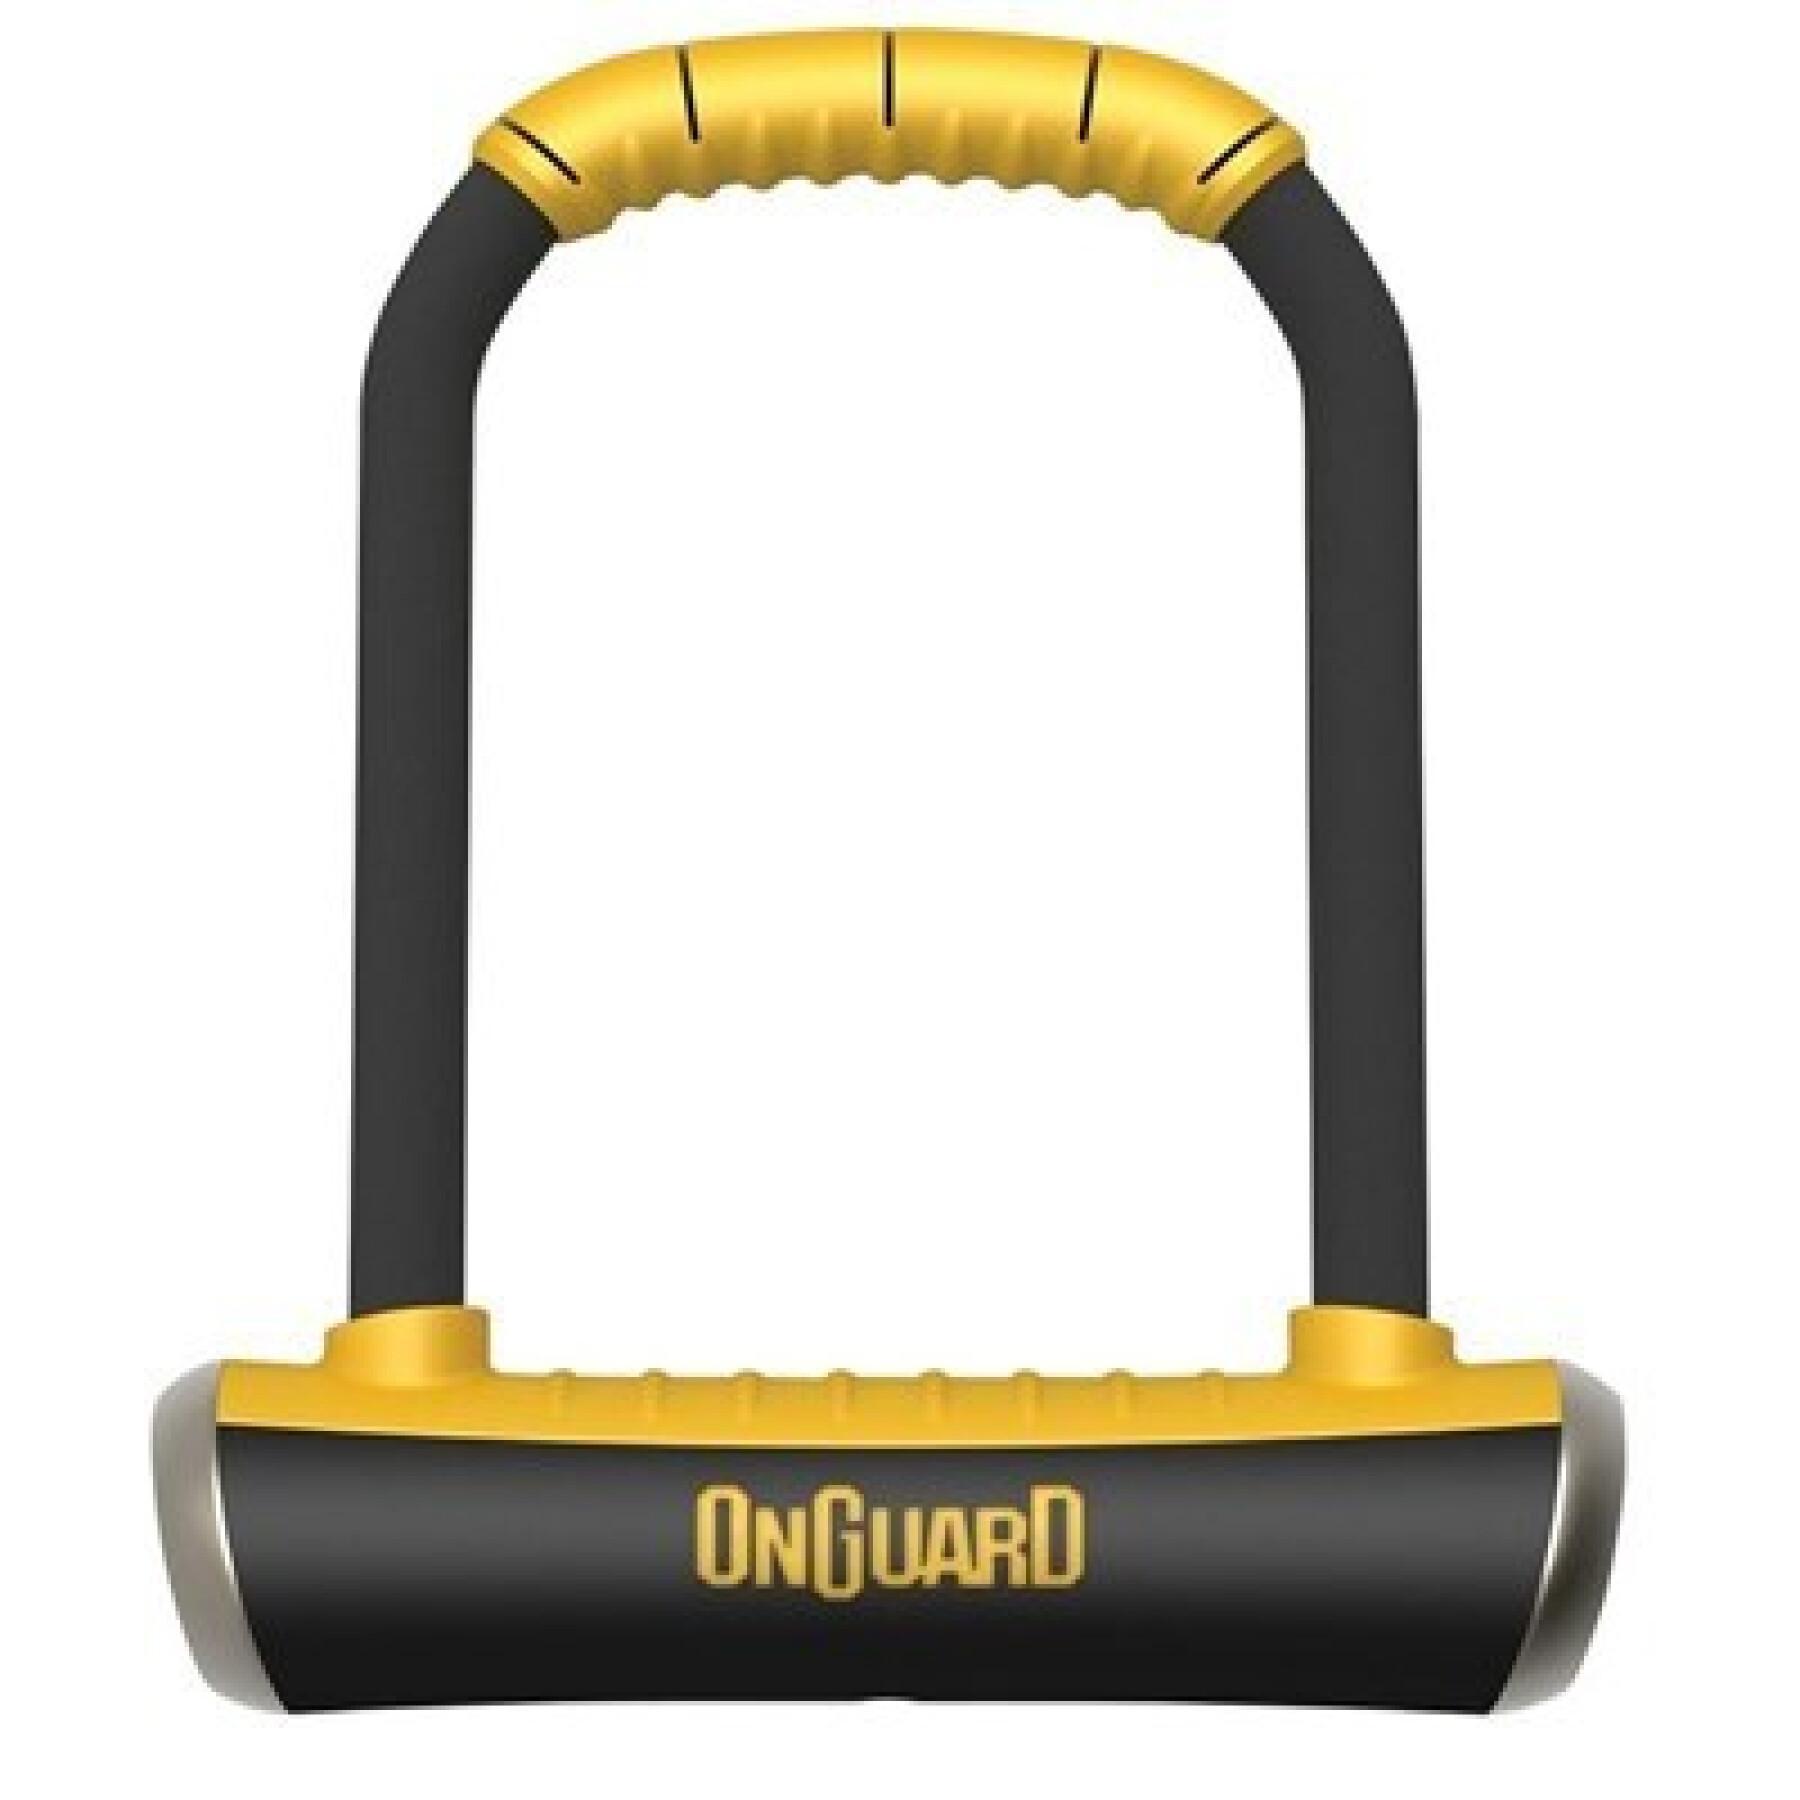 Antitheft u with support Onguard Brute Std 8001